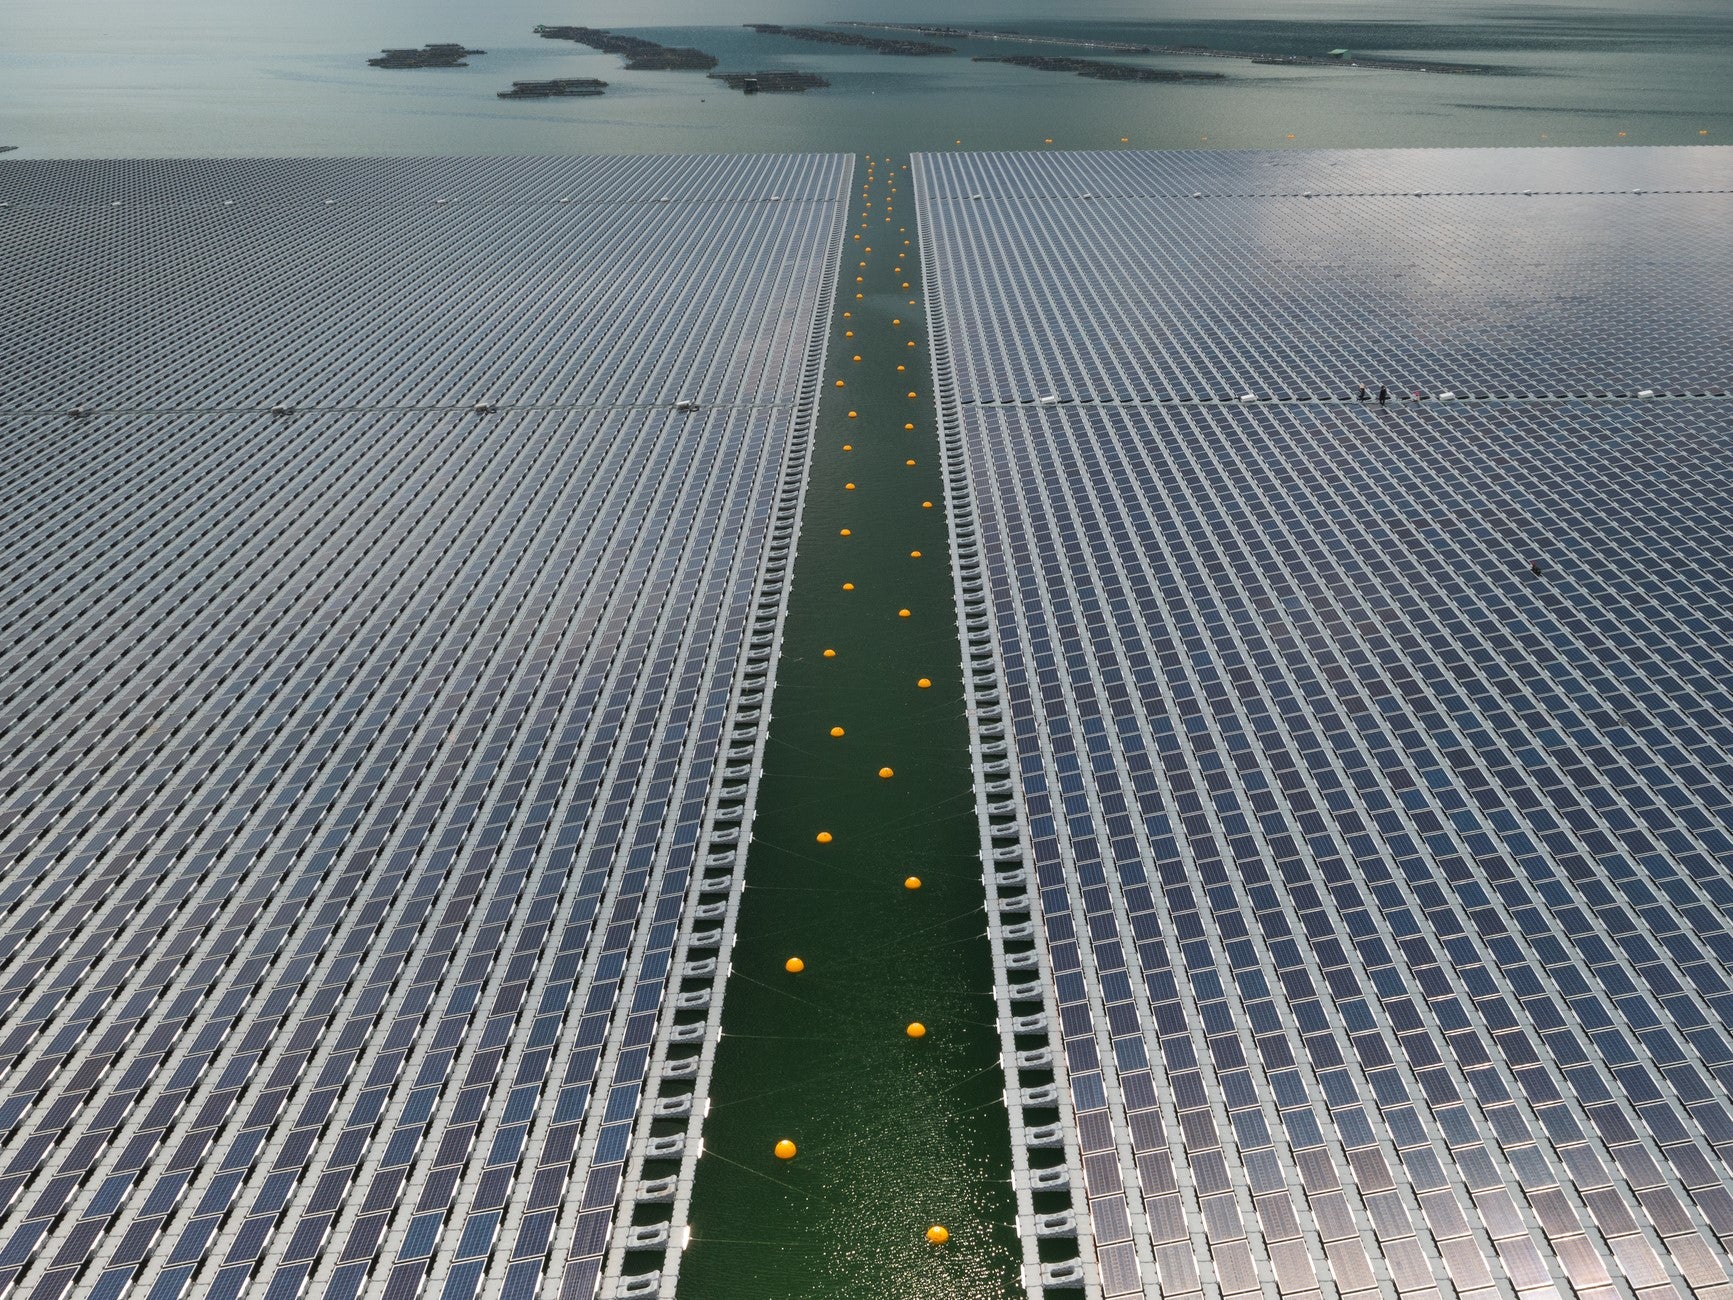 Solar panels floating in reservoirs could prevent evaporation and generate power